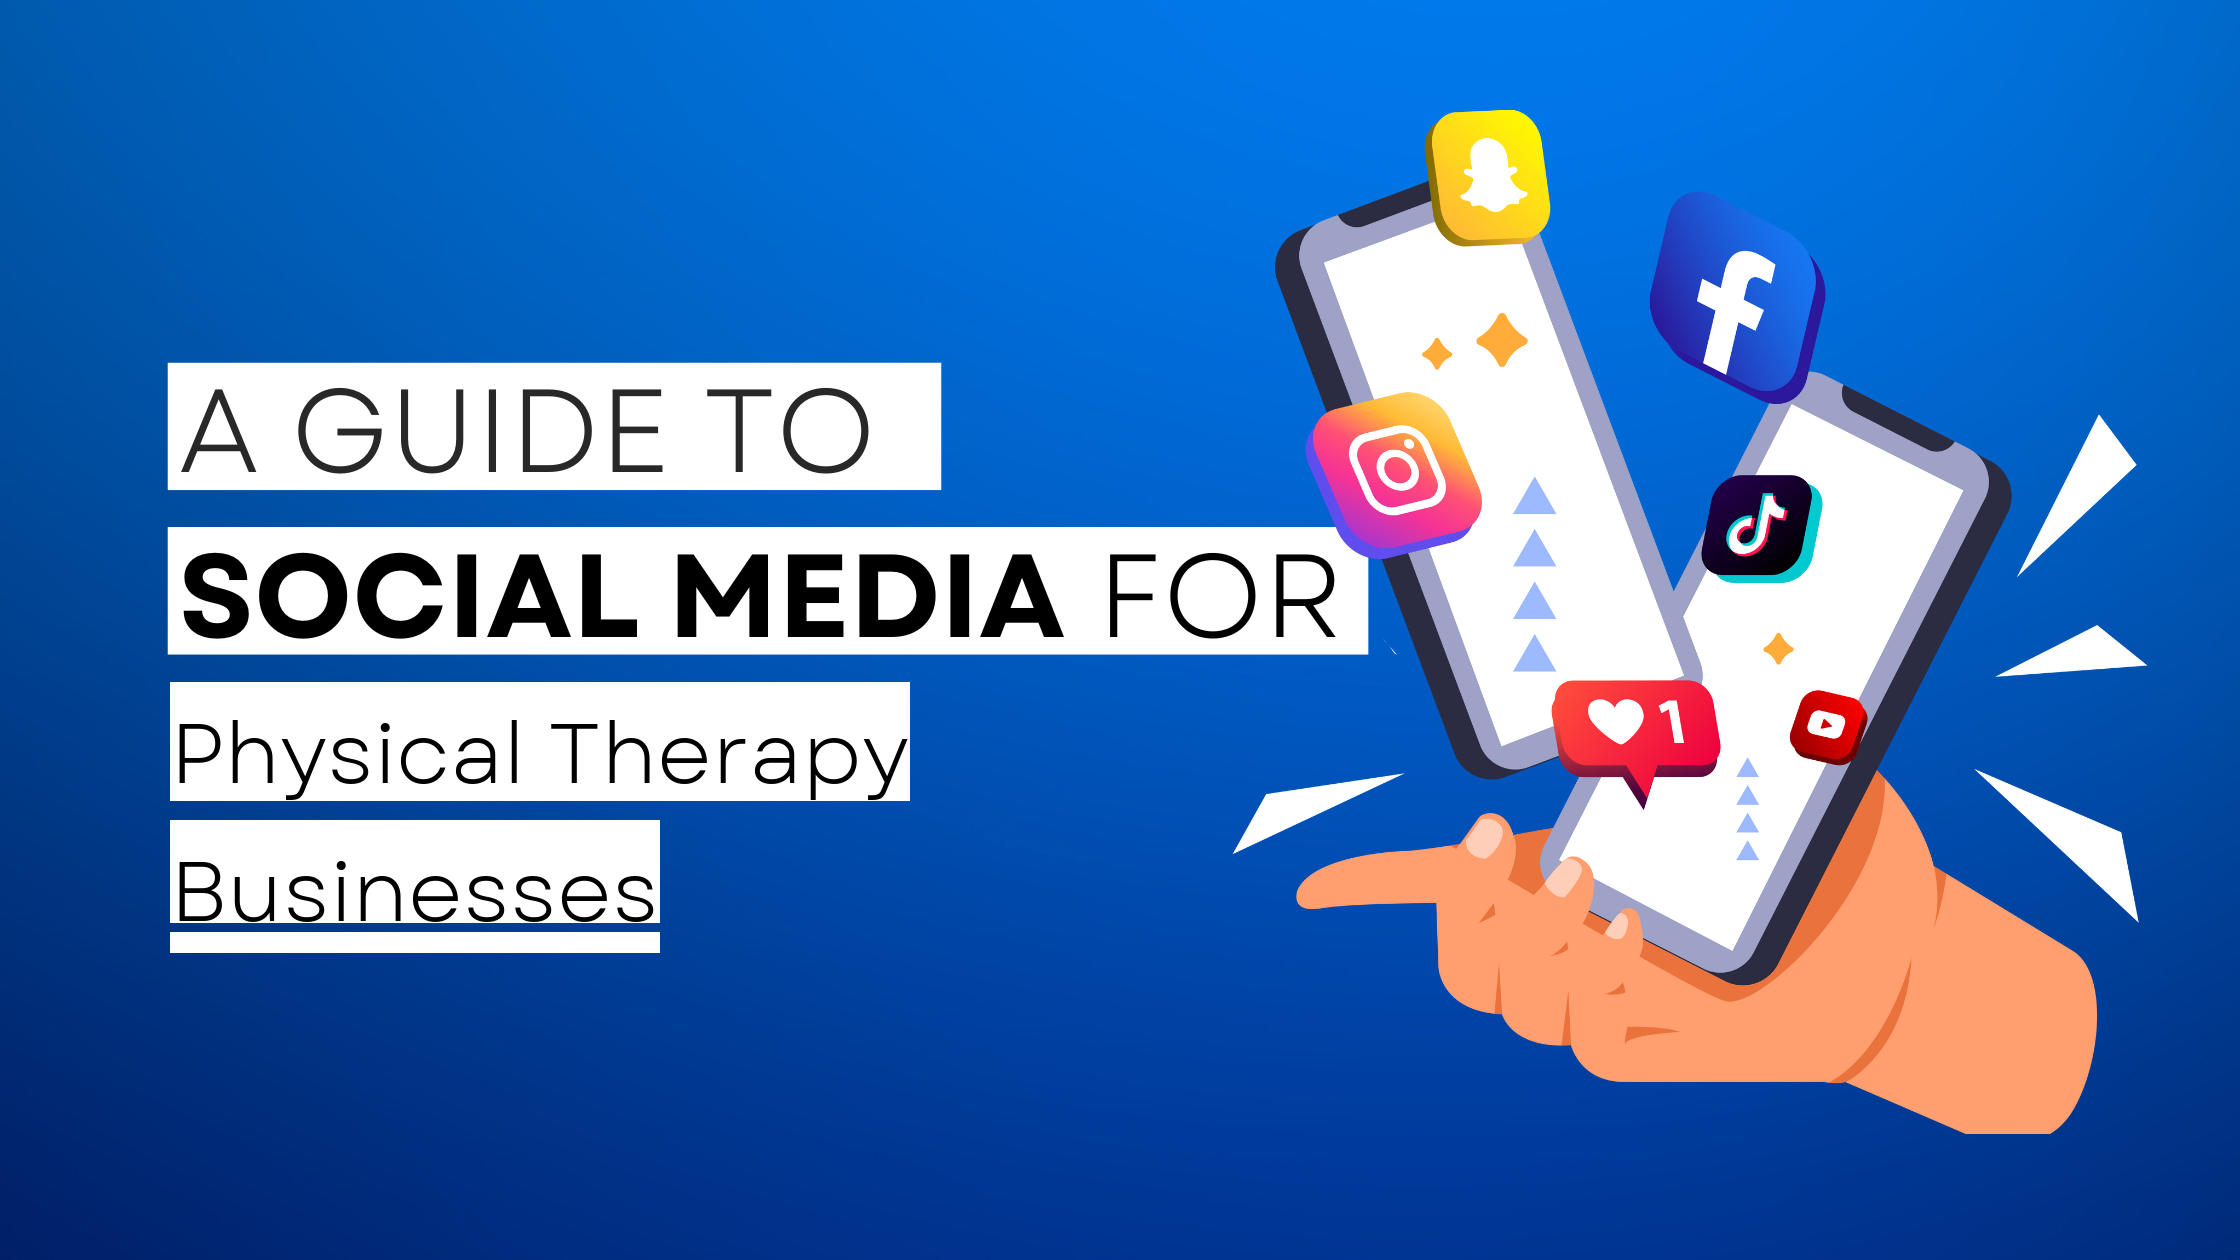 How to start Physical Therapy on social media